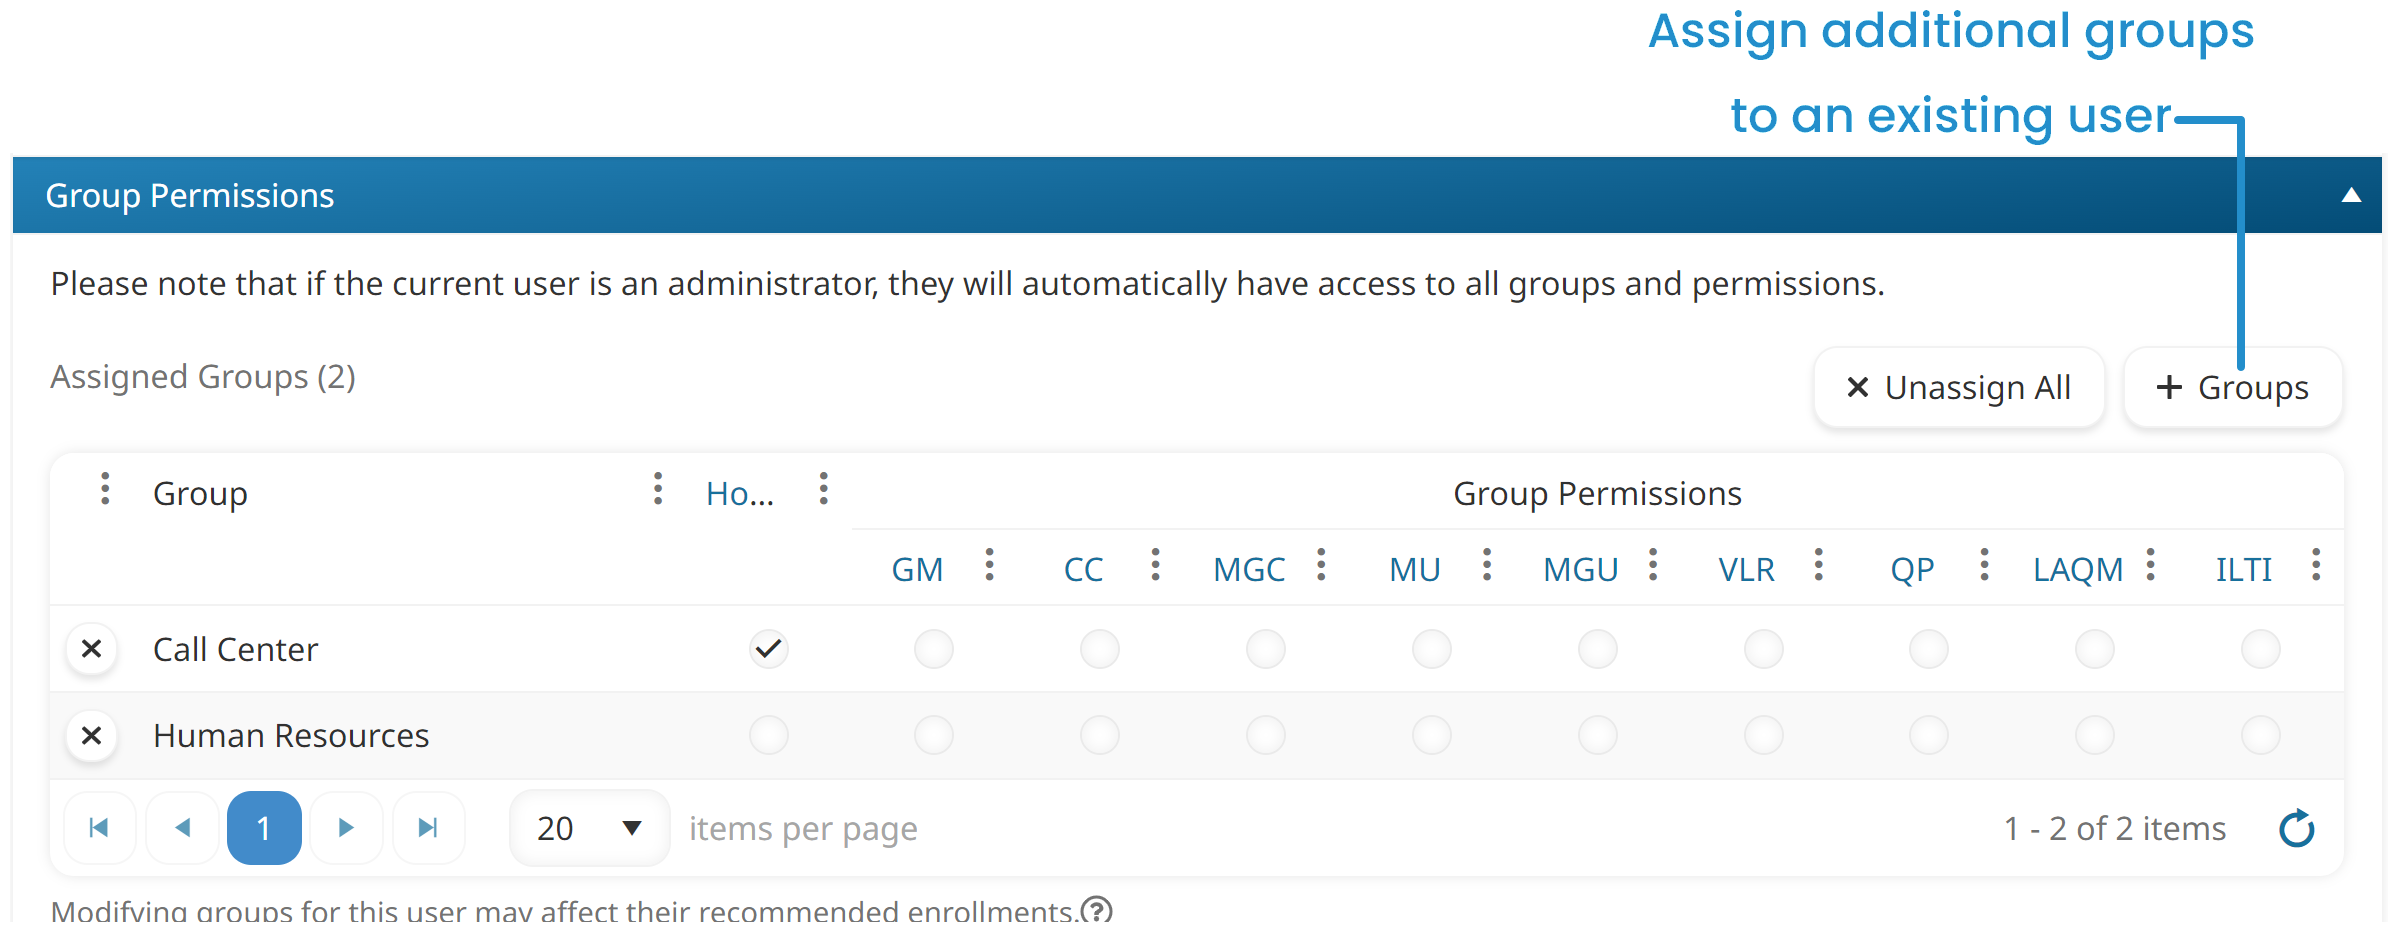 User Profile - Group Permissions - Add Groups Button 20230224(1)